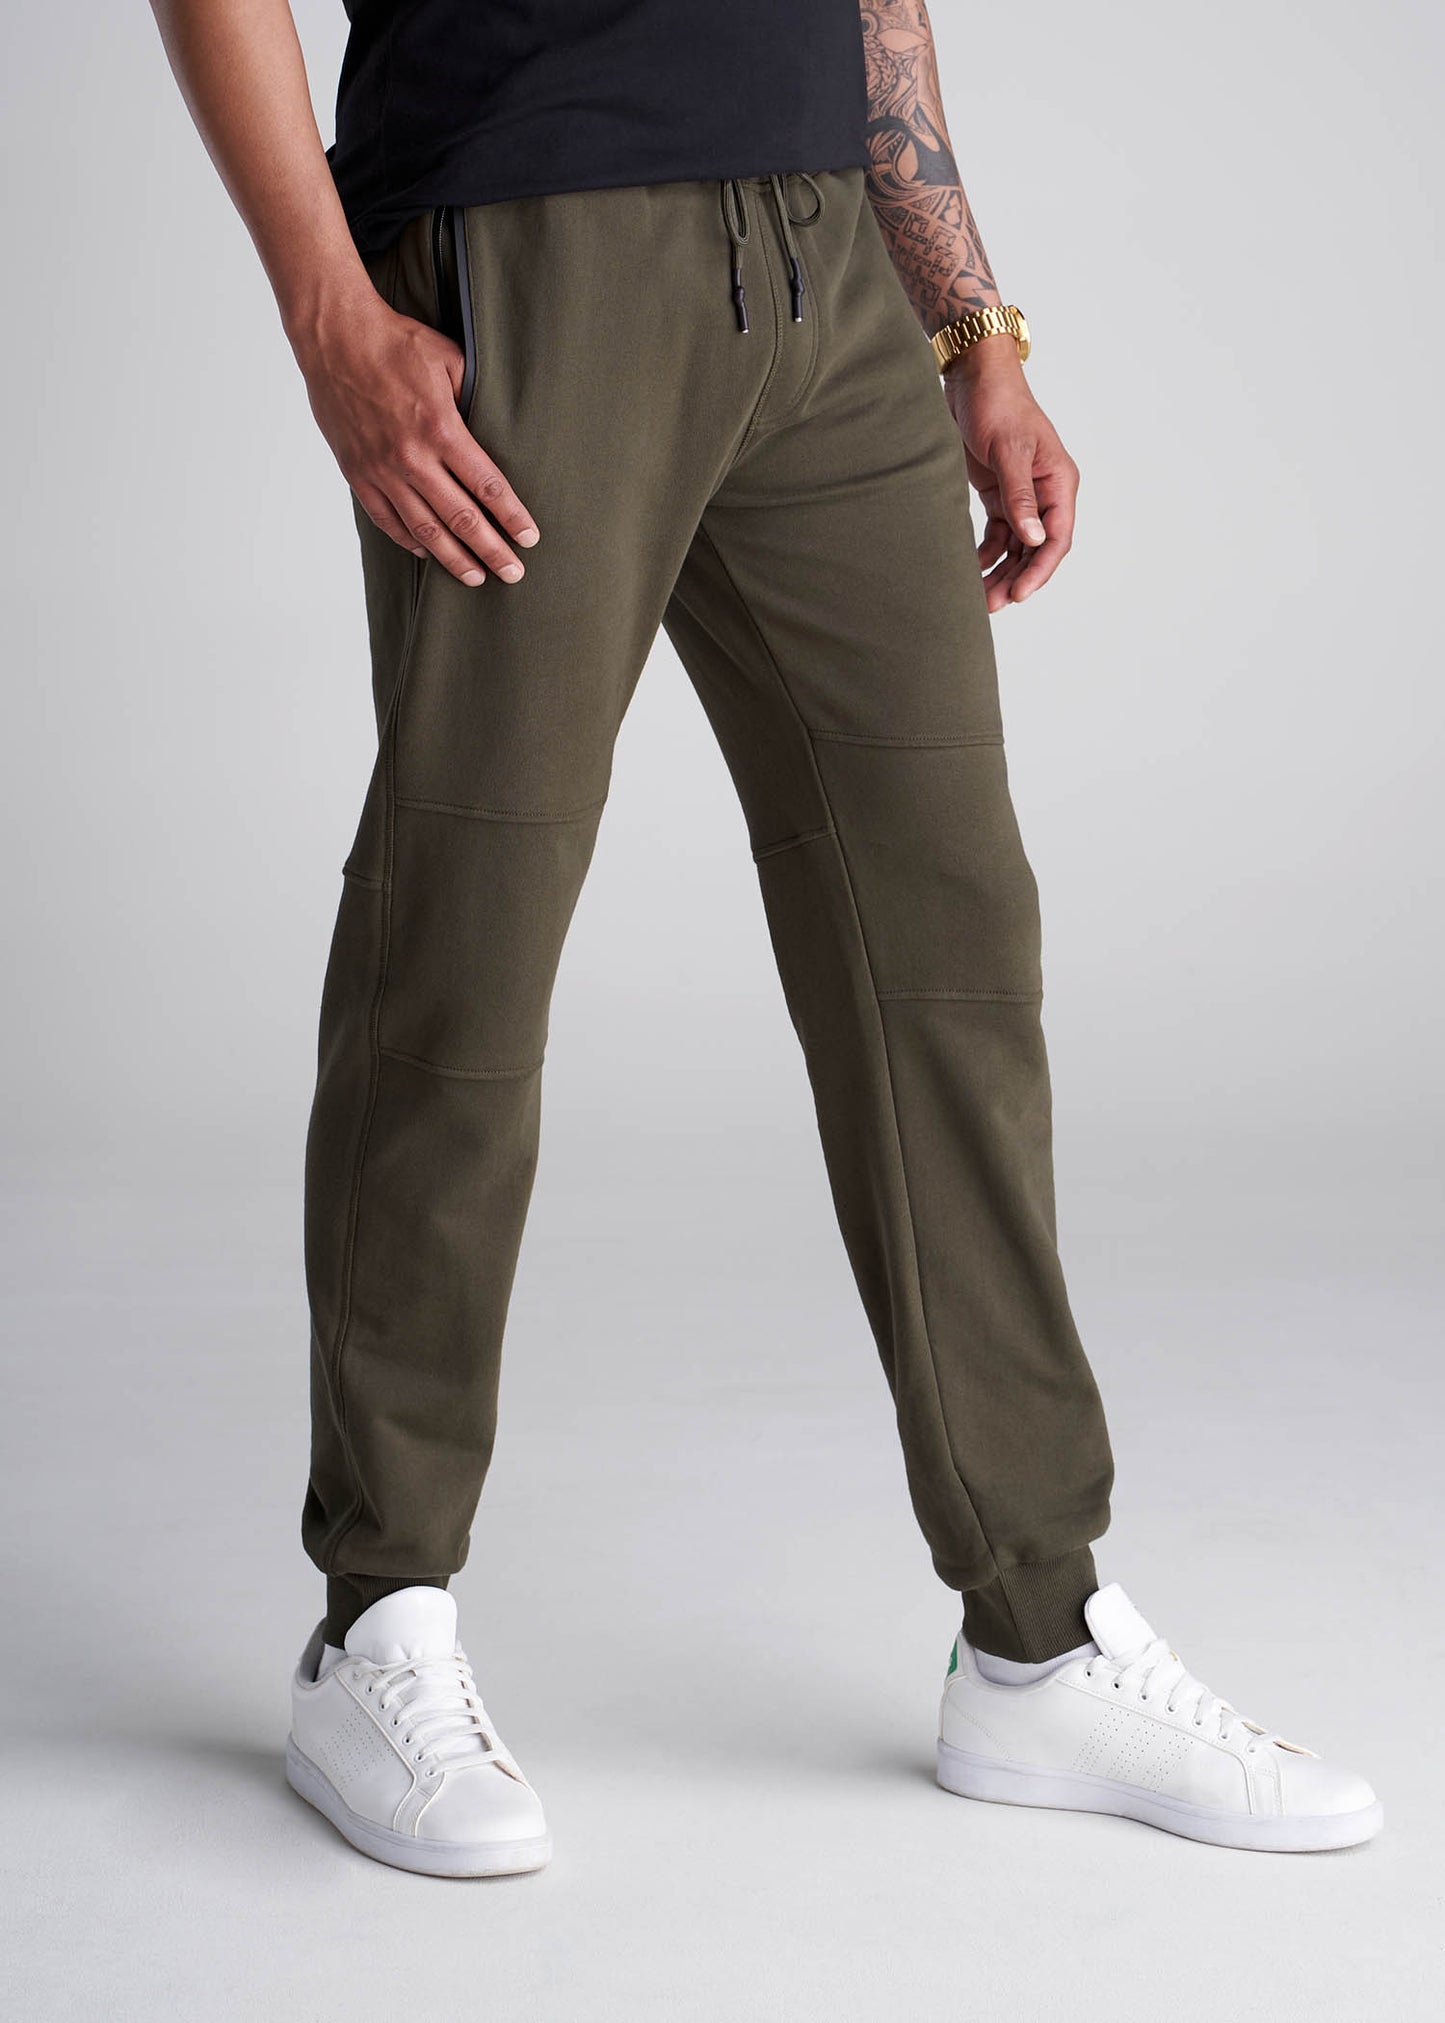 American_Tall_Men_Tall_French_Terry_Zip_Jogger_CamoGreen-Side